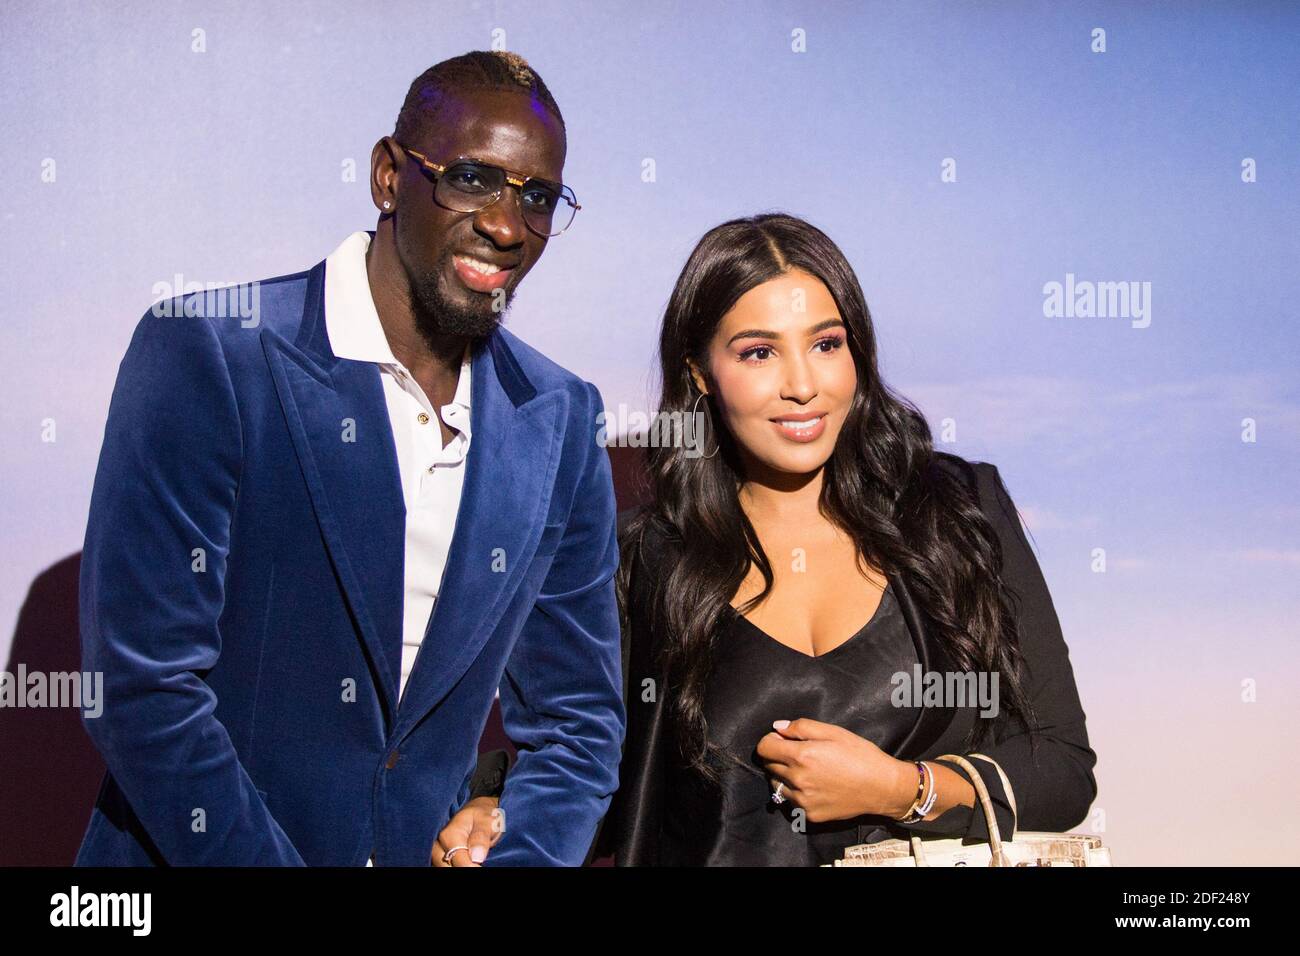 Mamadou Sakho And His Wife Majda Sakho Attends Le Prince Oublie Paris Film Premiere At Le Grand Rex In Paris On February 02 2020 Photo By Nasser Berzane Abacapress Com Stock Photo Alamy